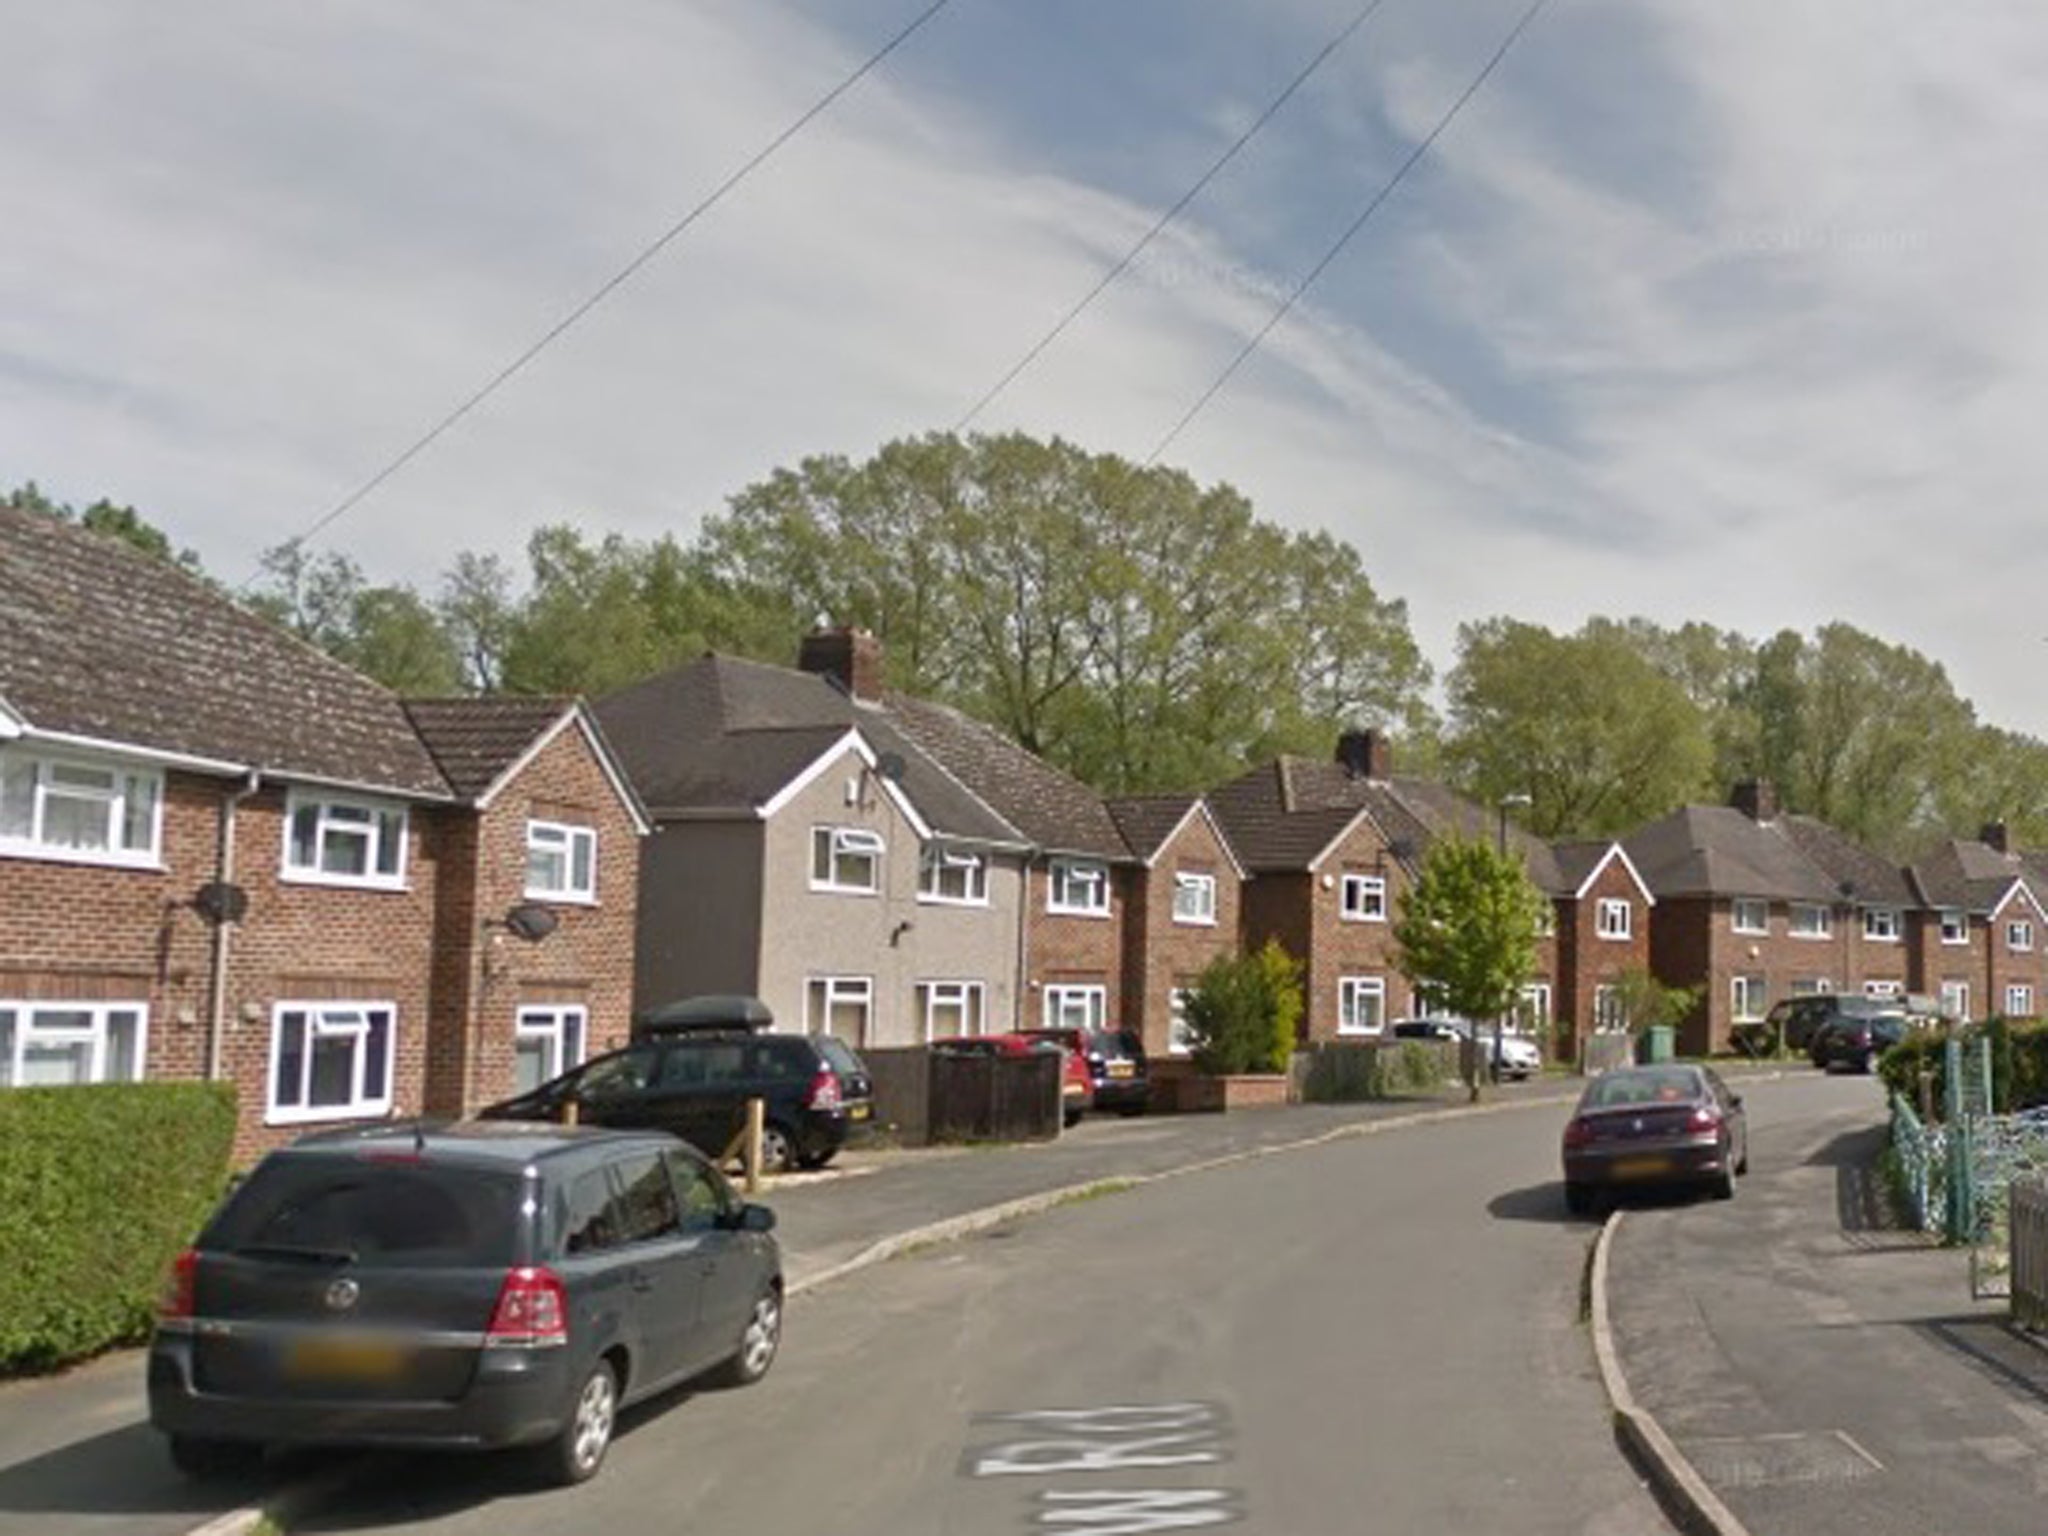 The man was found on Meadow Road in Rugby.